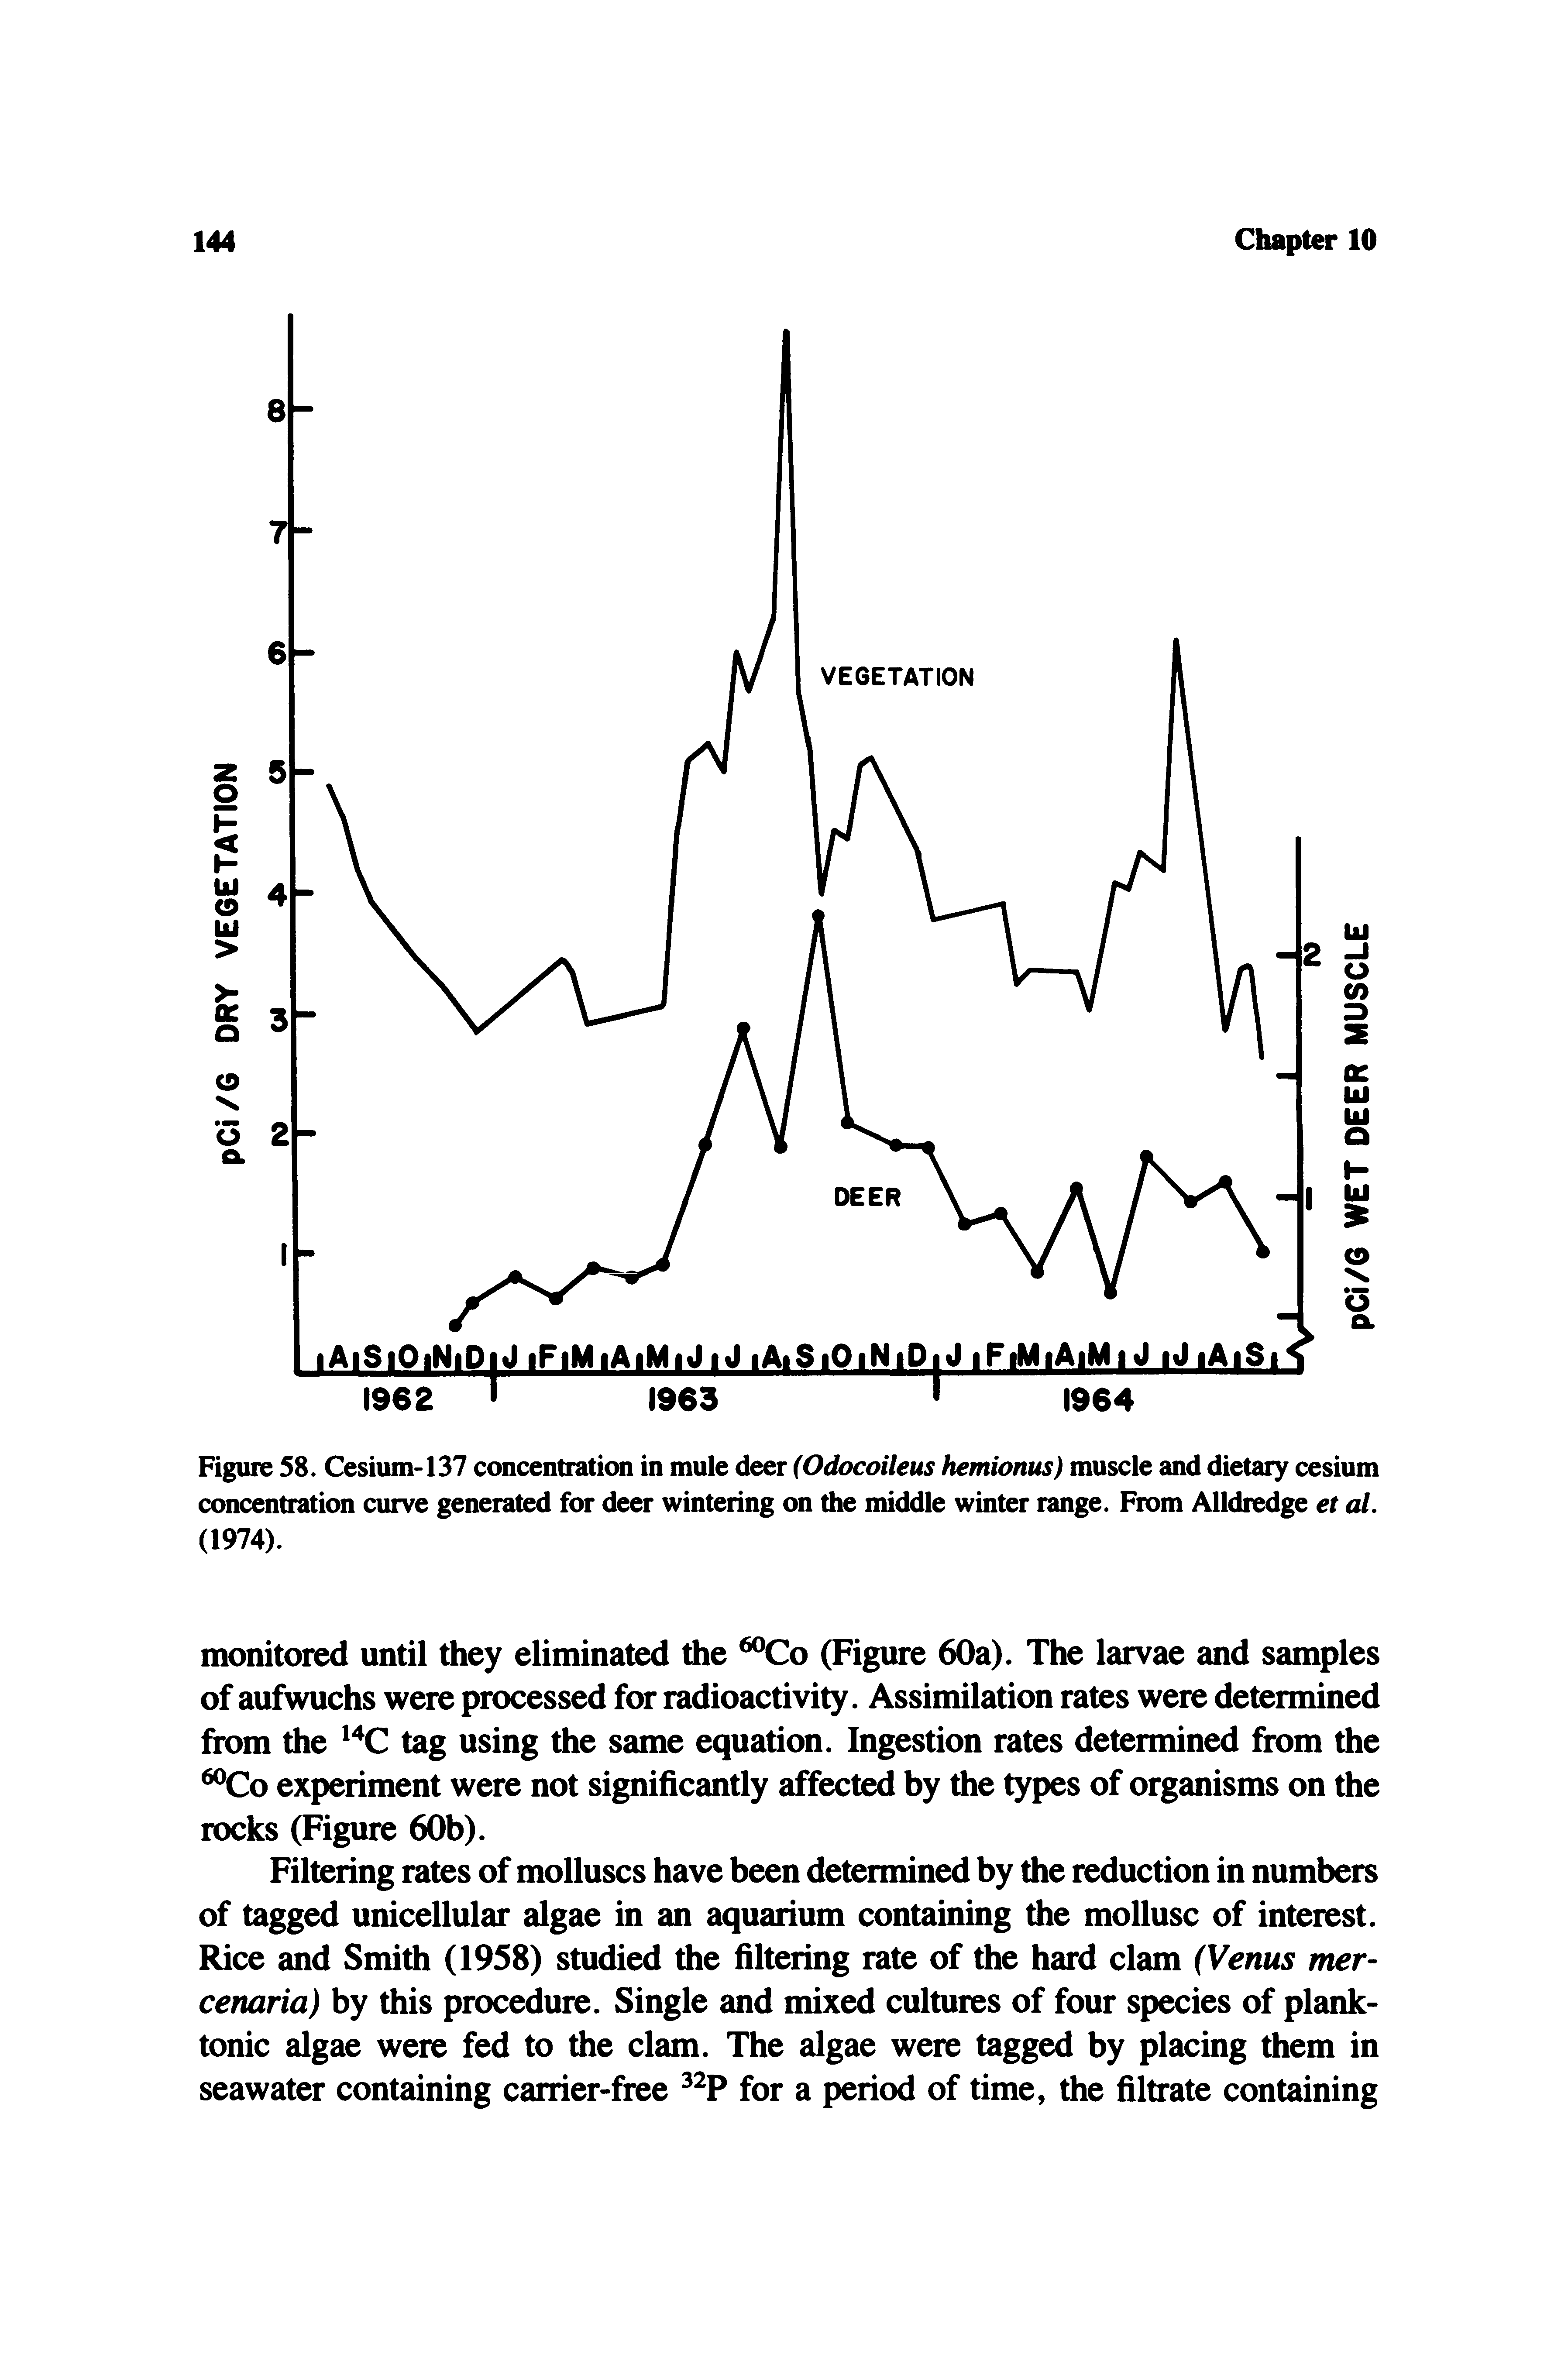 Figure 58. Cesium-137 concentration in mule deer (Odocoileus hemionus) muscle and dietary cesium concentration curve generated for deer wintering on the middle winter range. From Alldredge et al. (1974).